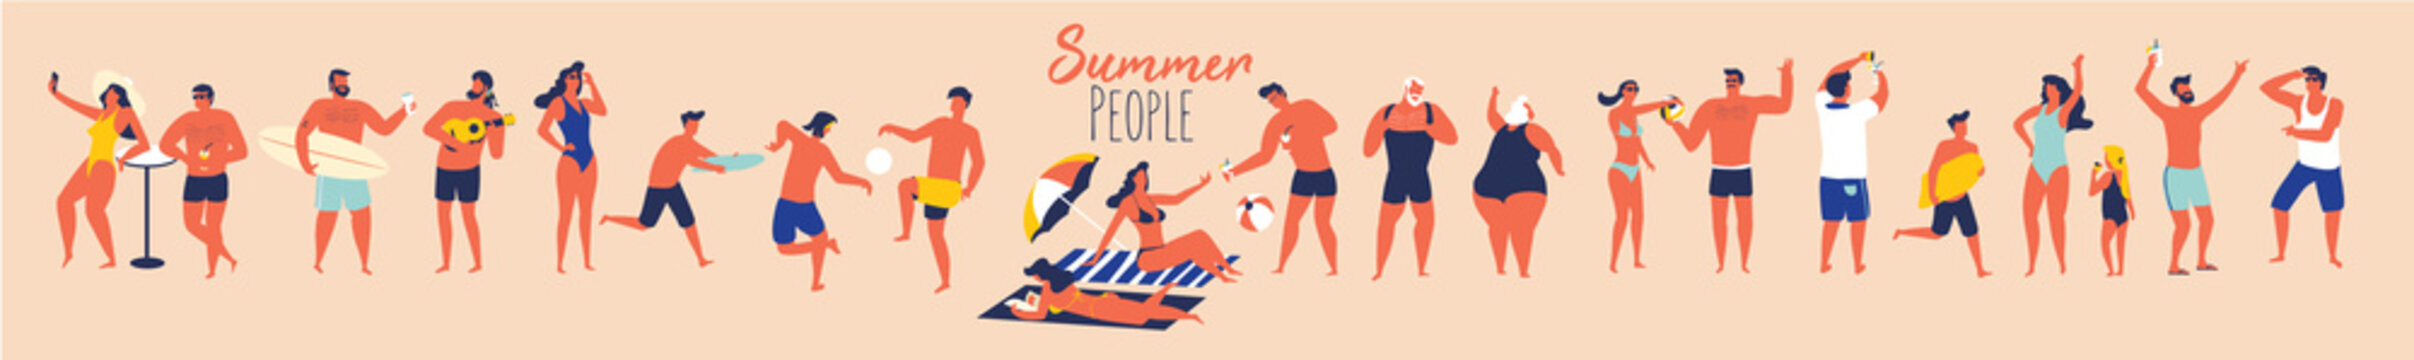 Summer holidays. People in swimming suit in different situations on the beach. Flat design illustration.